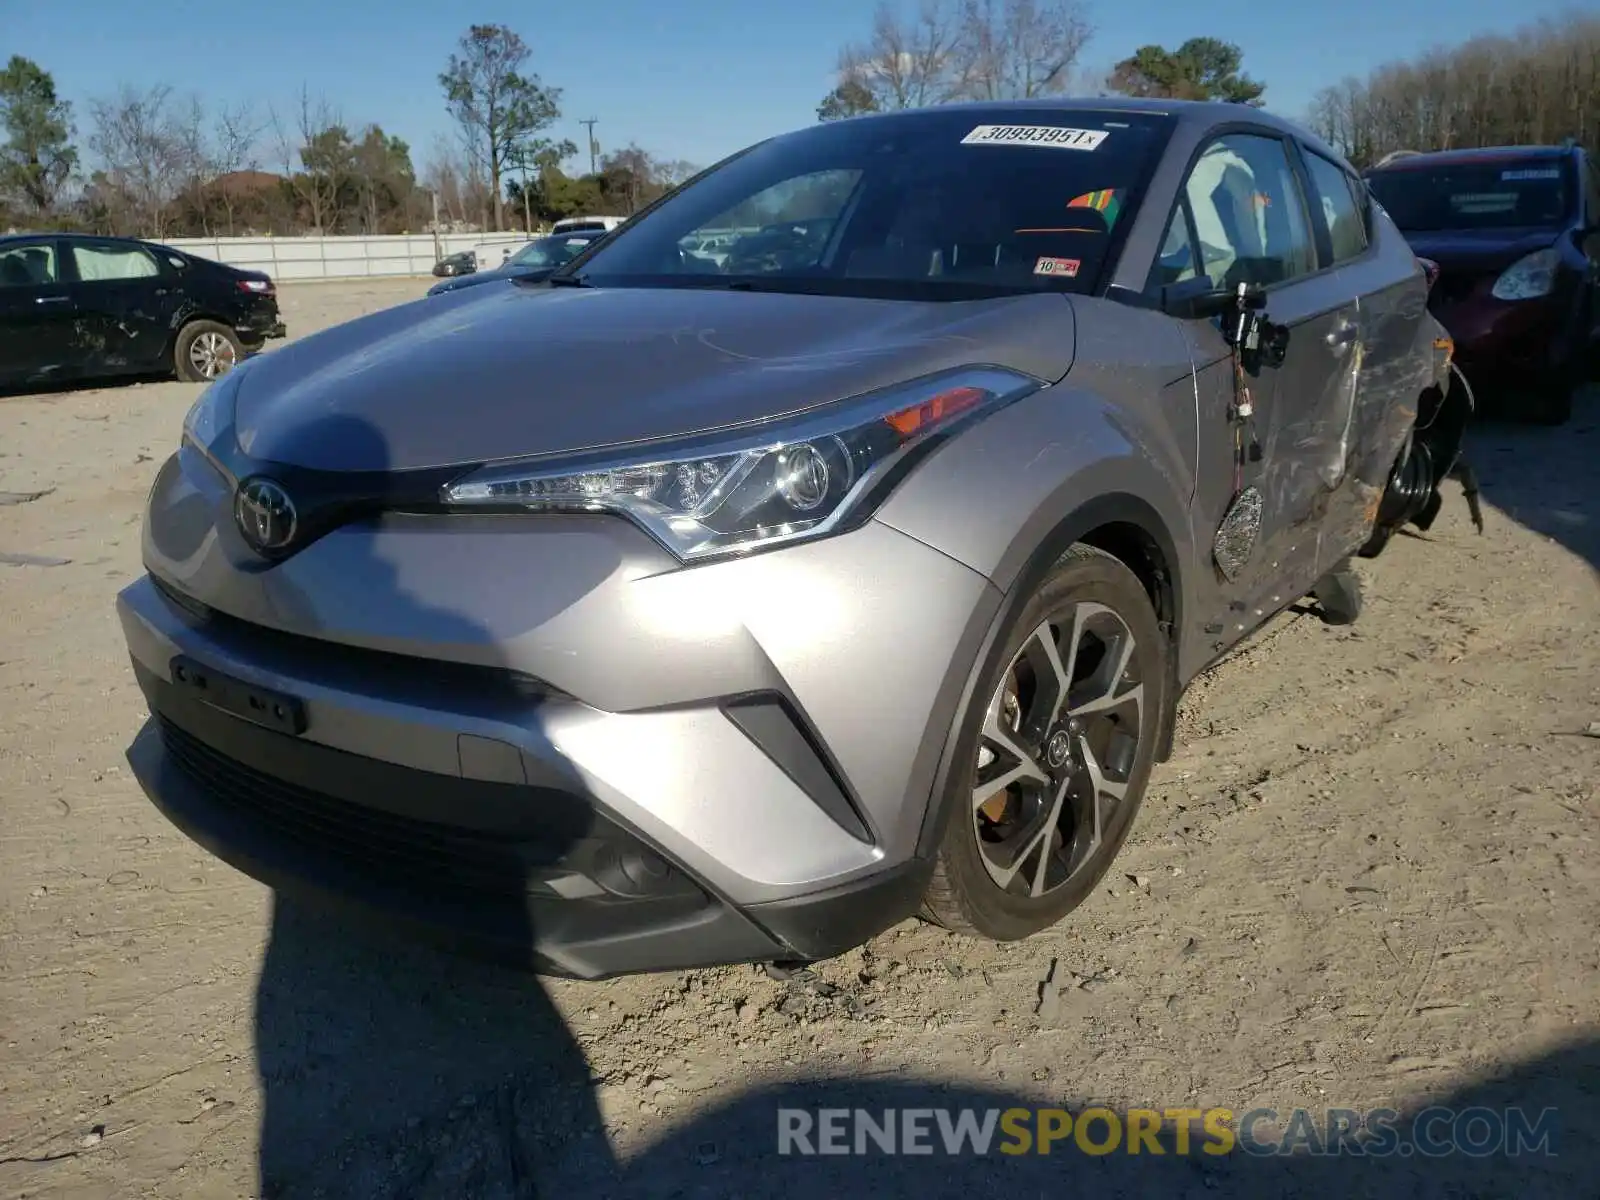 2 Photograph of a damaged car NMTKHMBXXKR097130 TOYOTA C-HR 2019